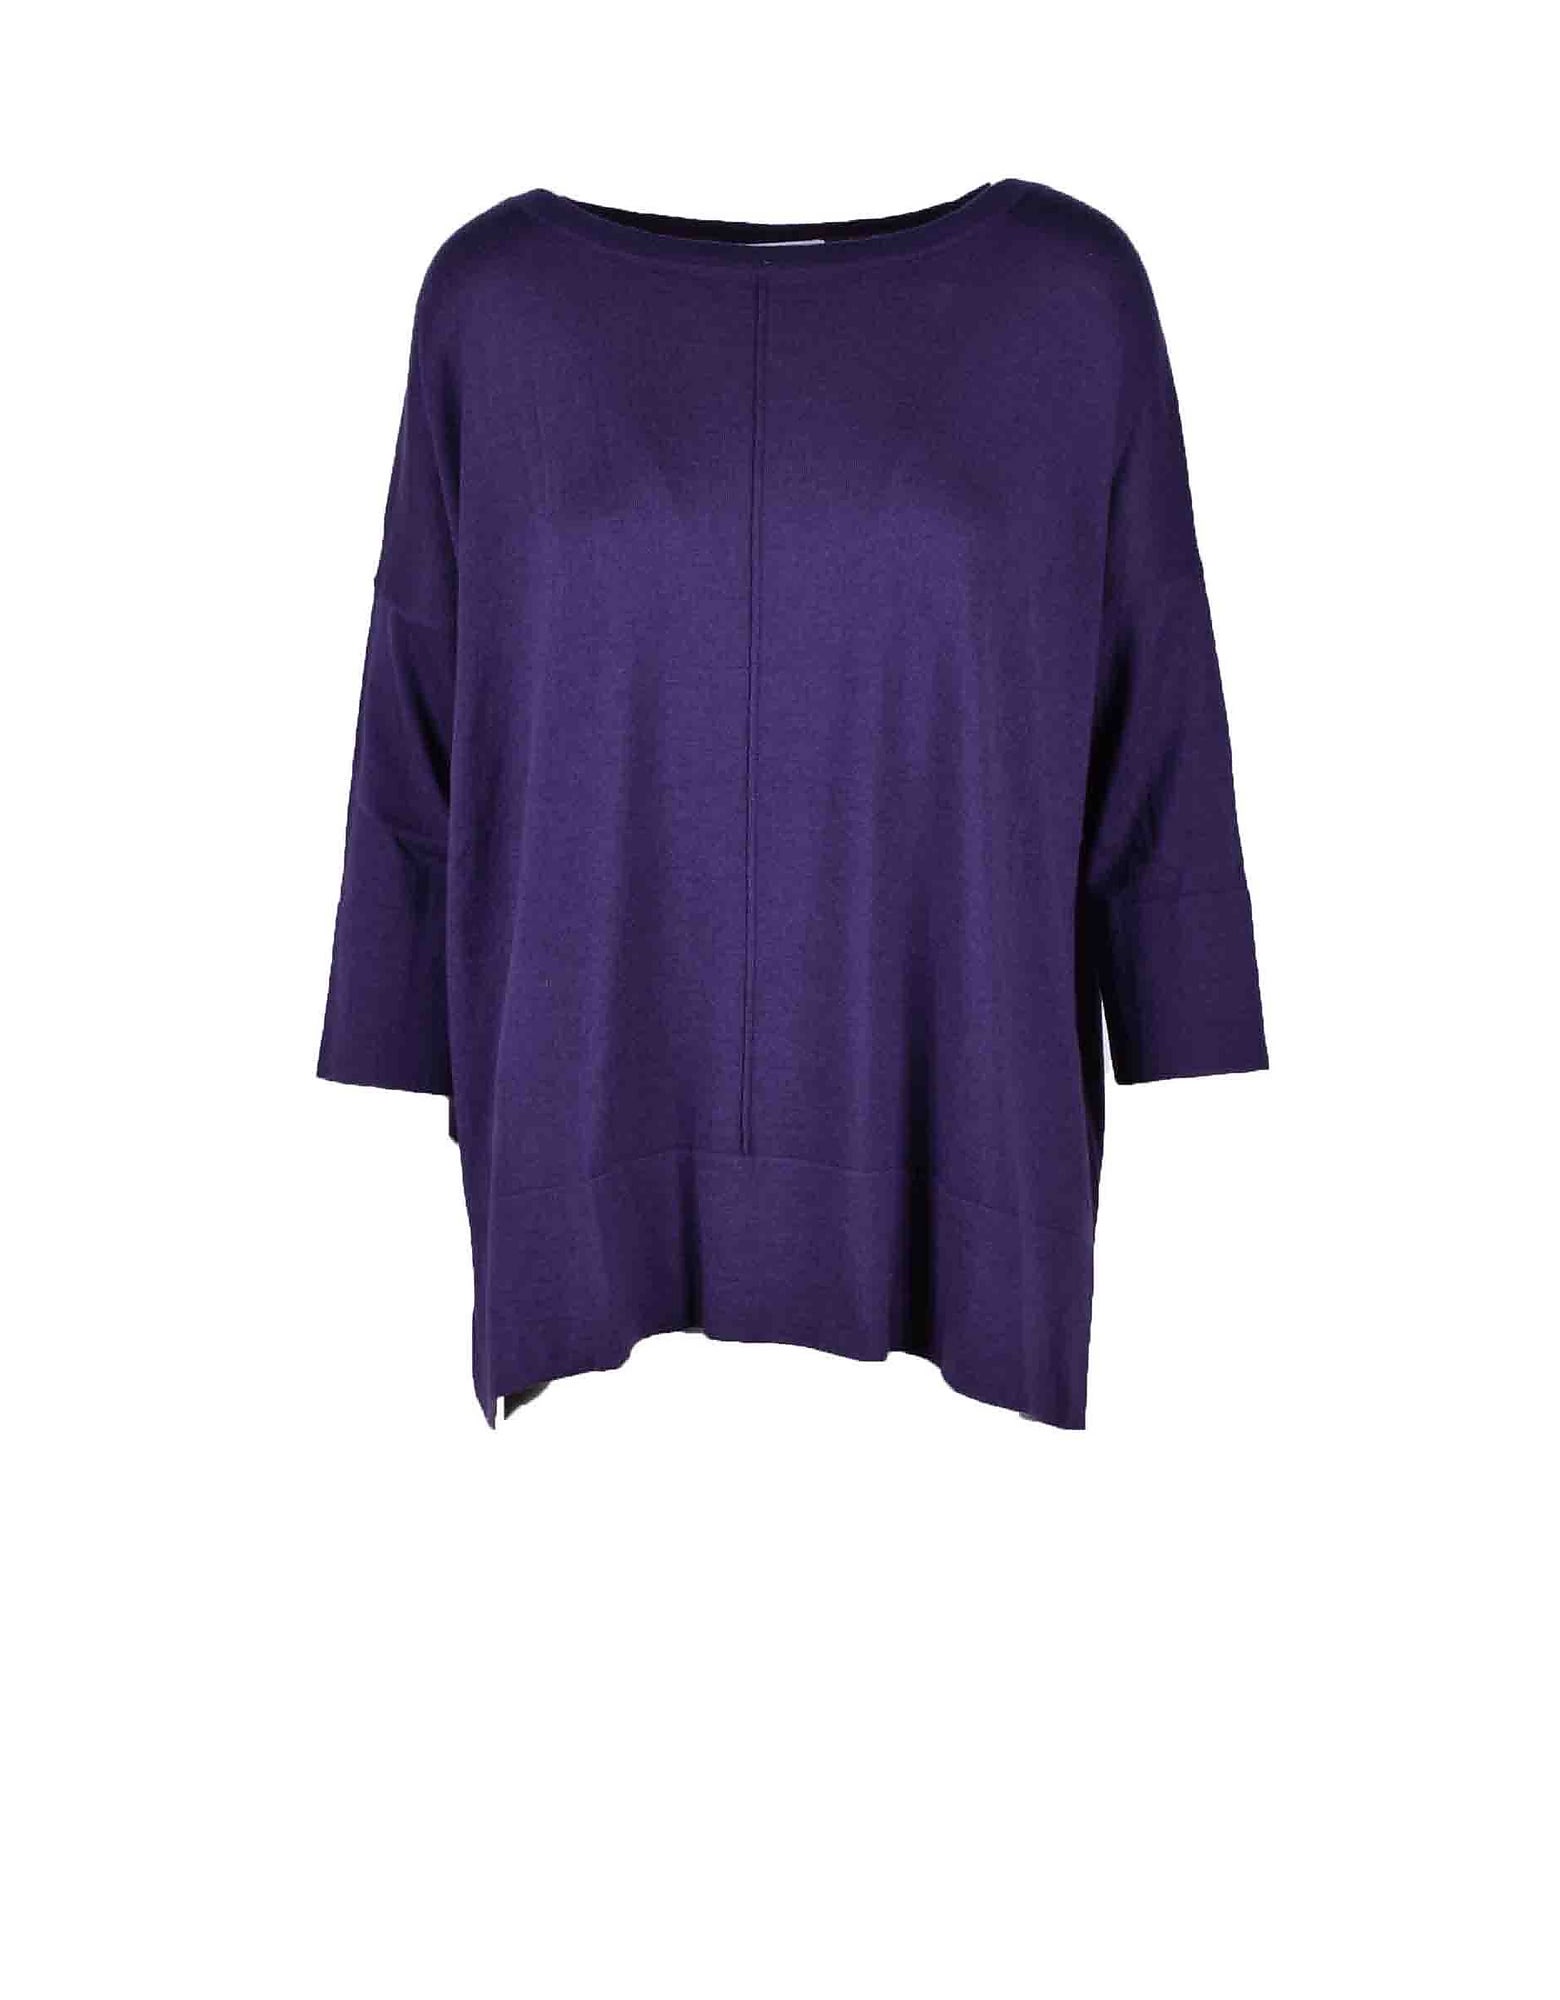 Snobby Sheep Womens Violet Sweater